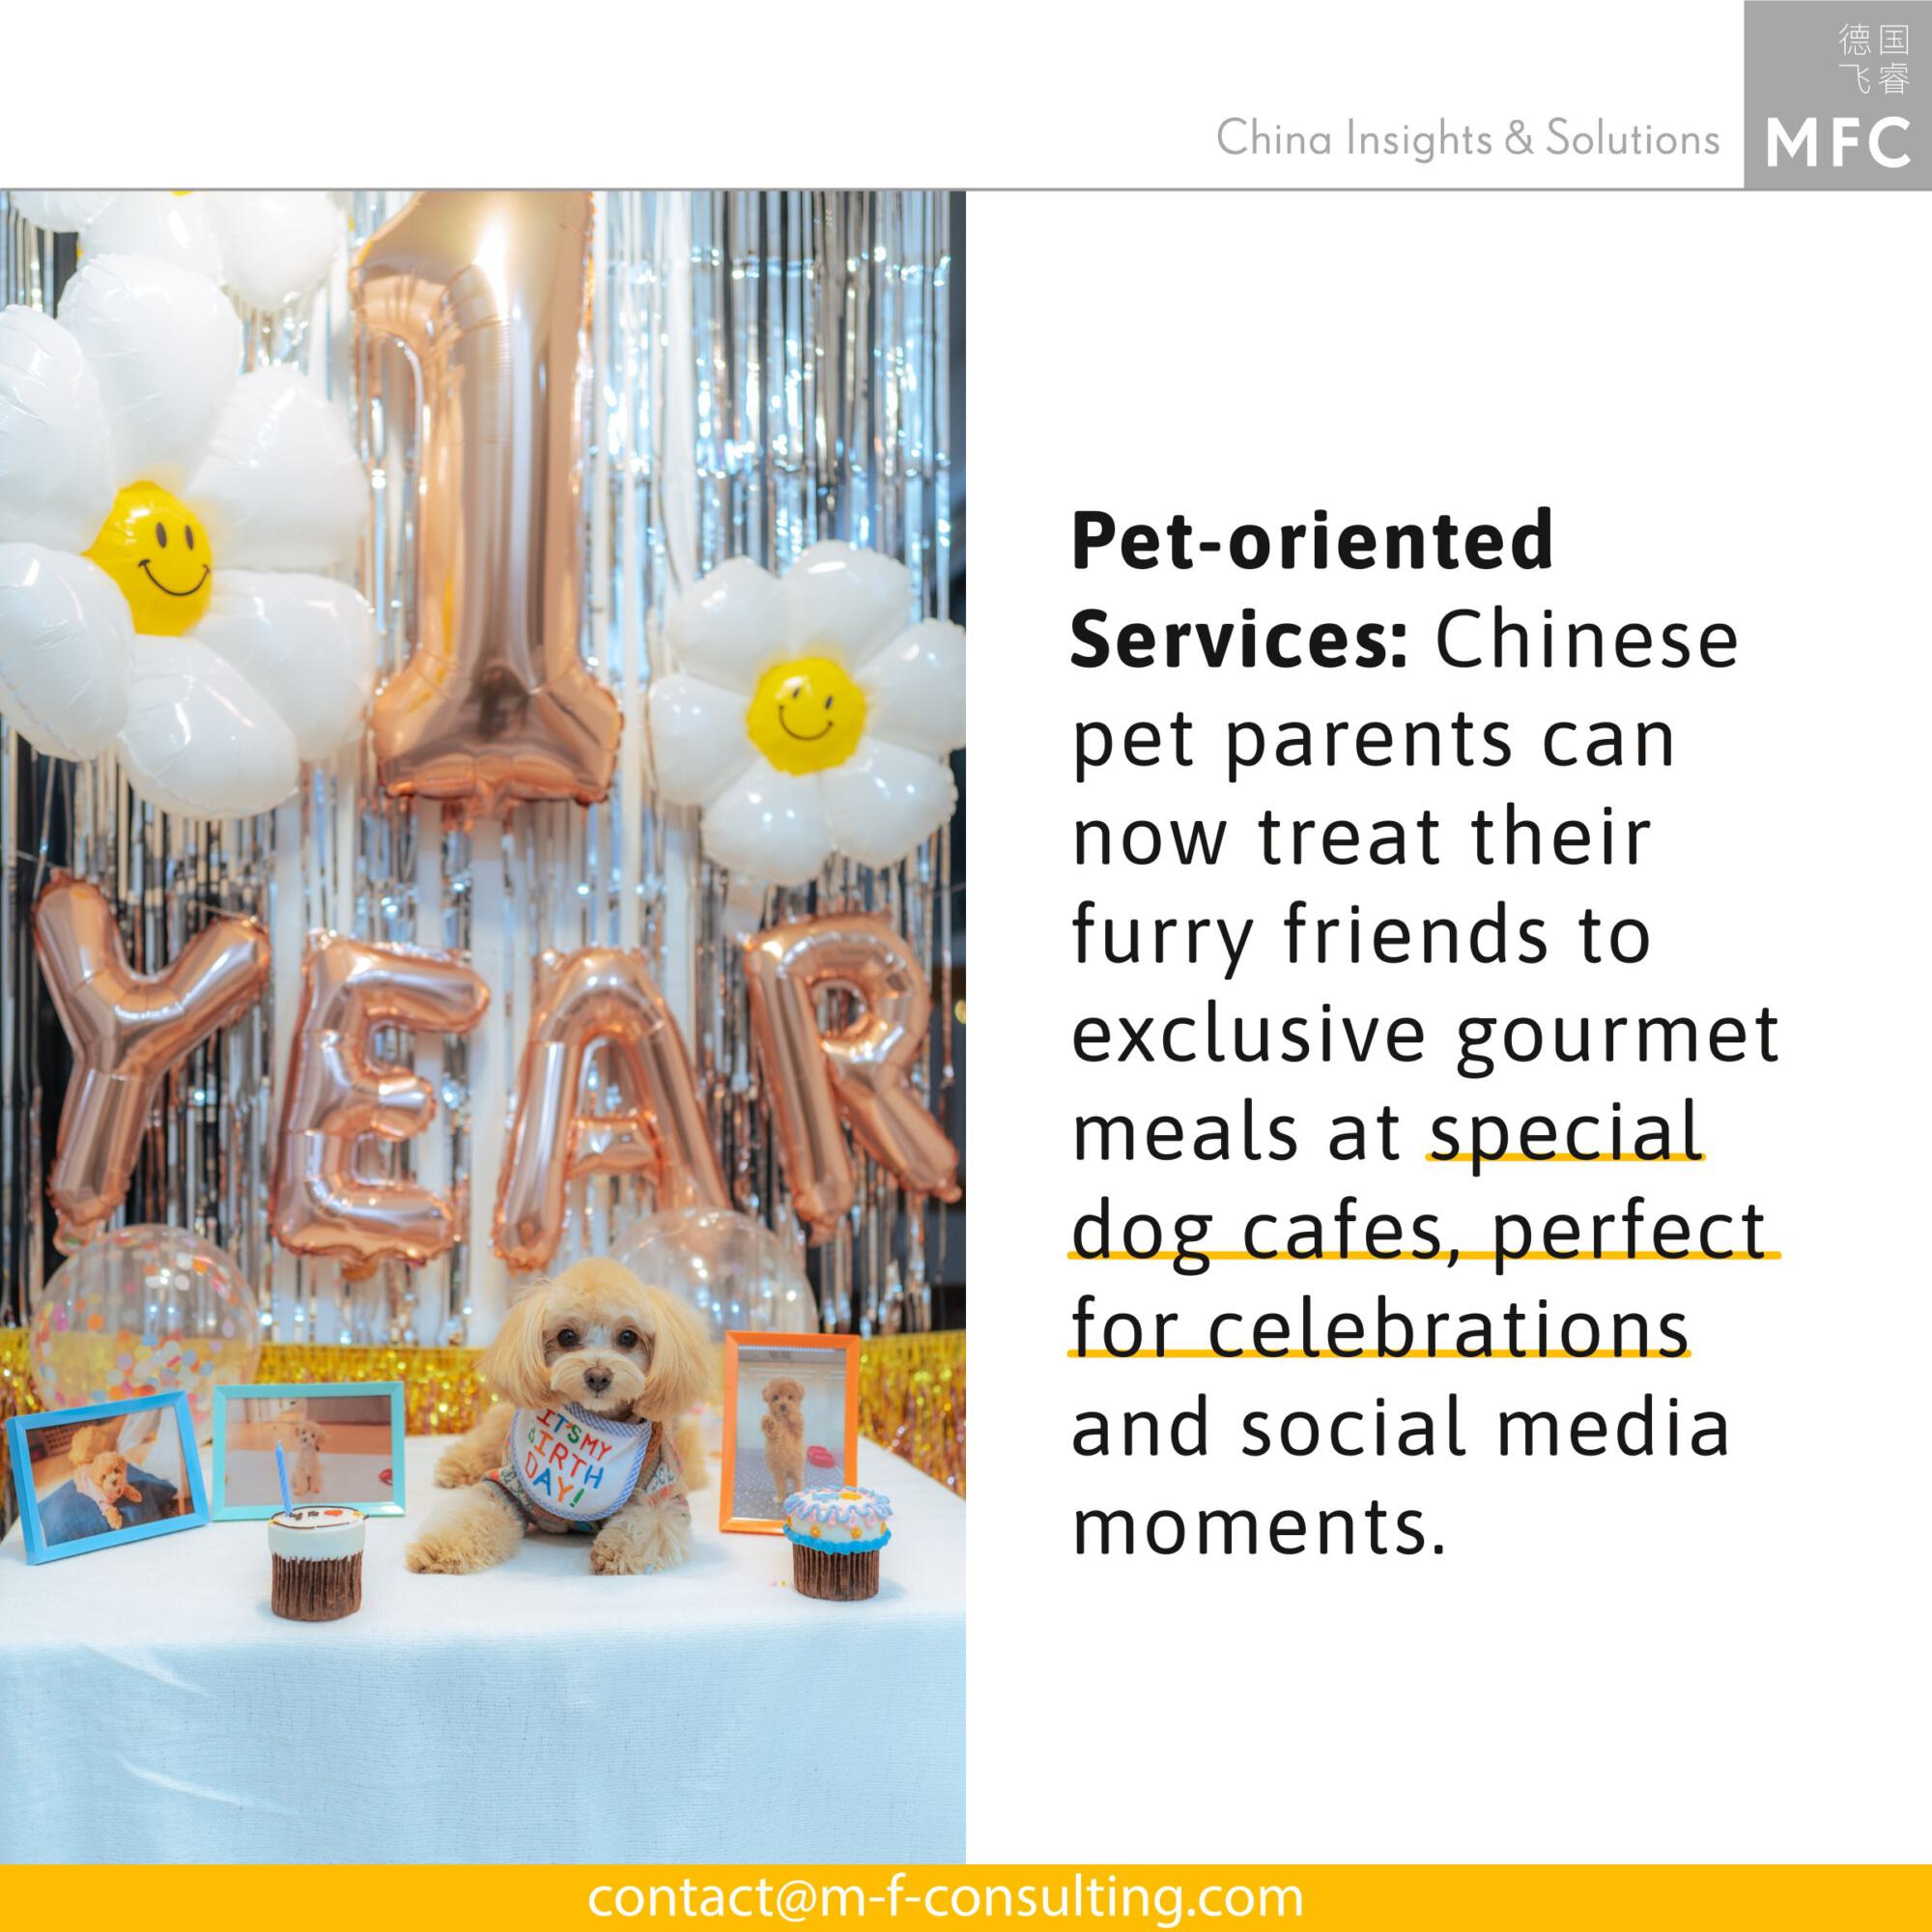 China's pet industry: Pet-oriented services: Chinese pet parents can now treat their furry friends to exclusive gourmet meals at special dog cafes, perfect for celebrations and social media moments.